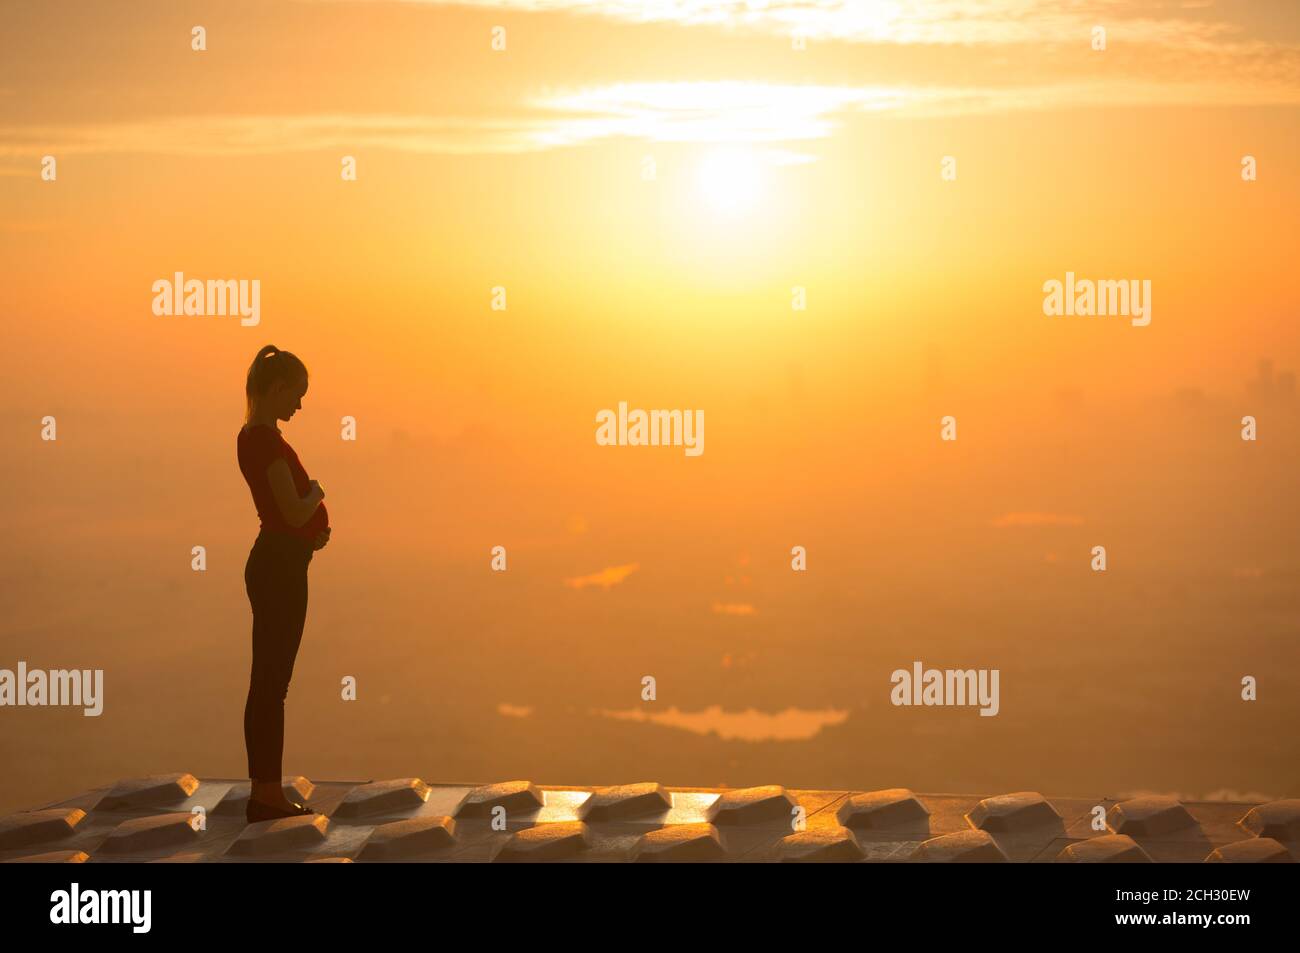 Silhouette of a pregnant woman holding her stomach while standing on a building rooftop during a beautiful orange sunset sky. Maternity and health. Stock Photo